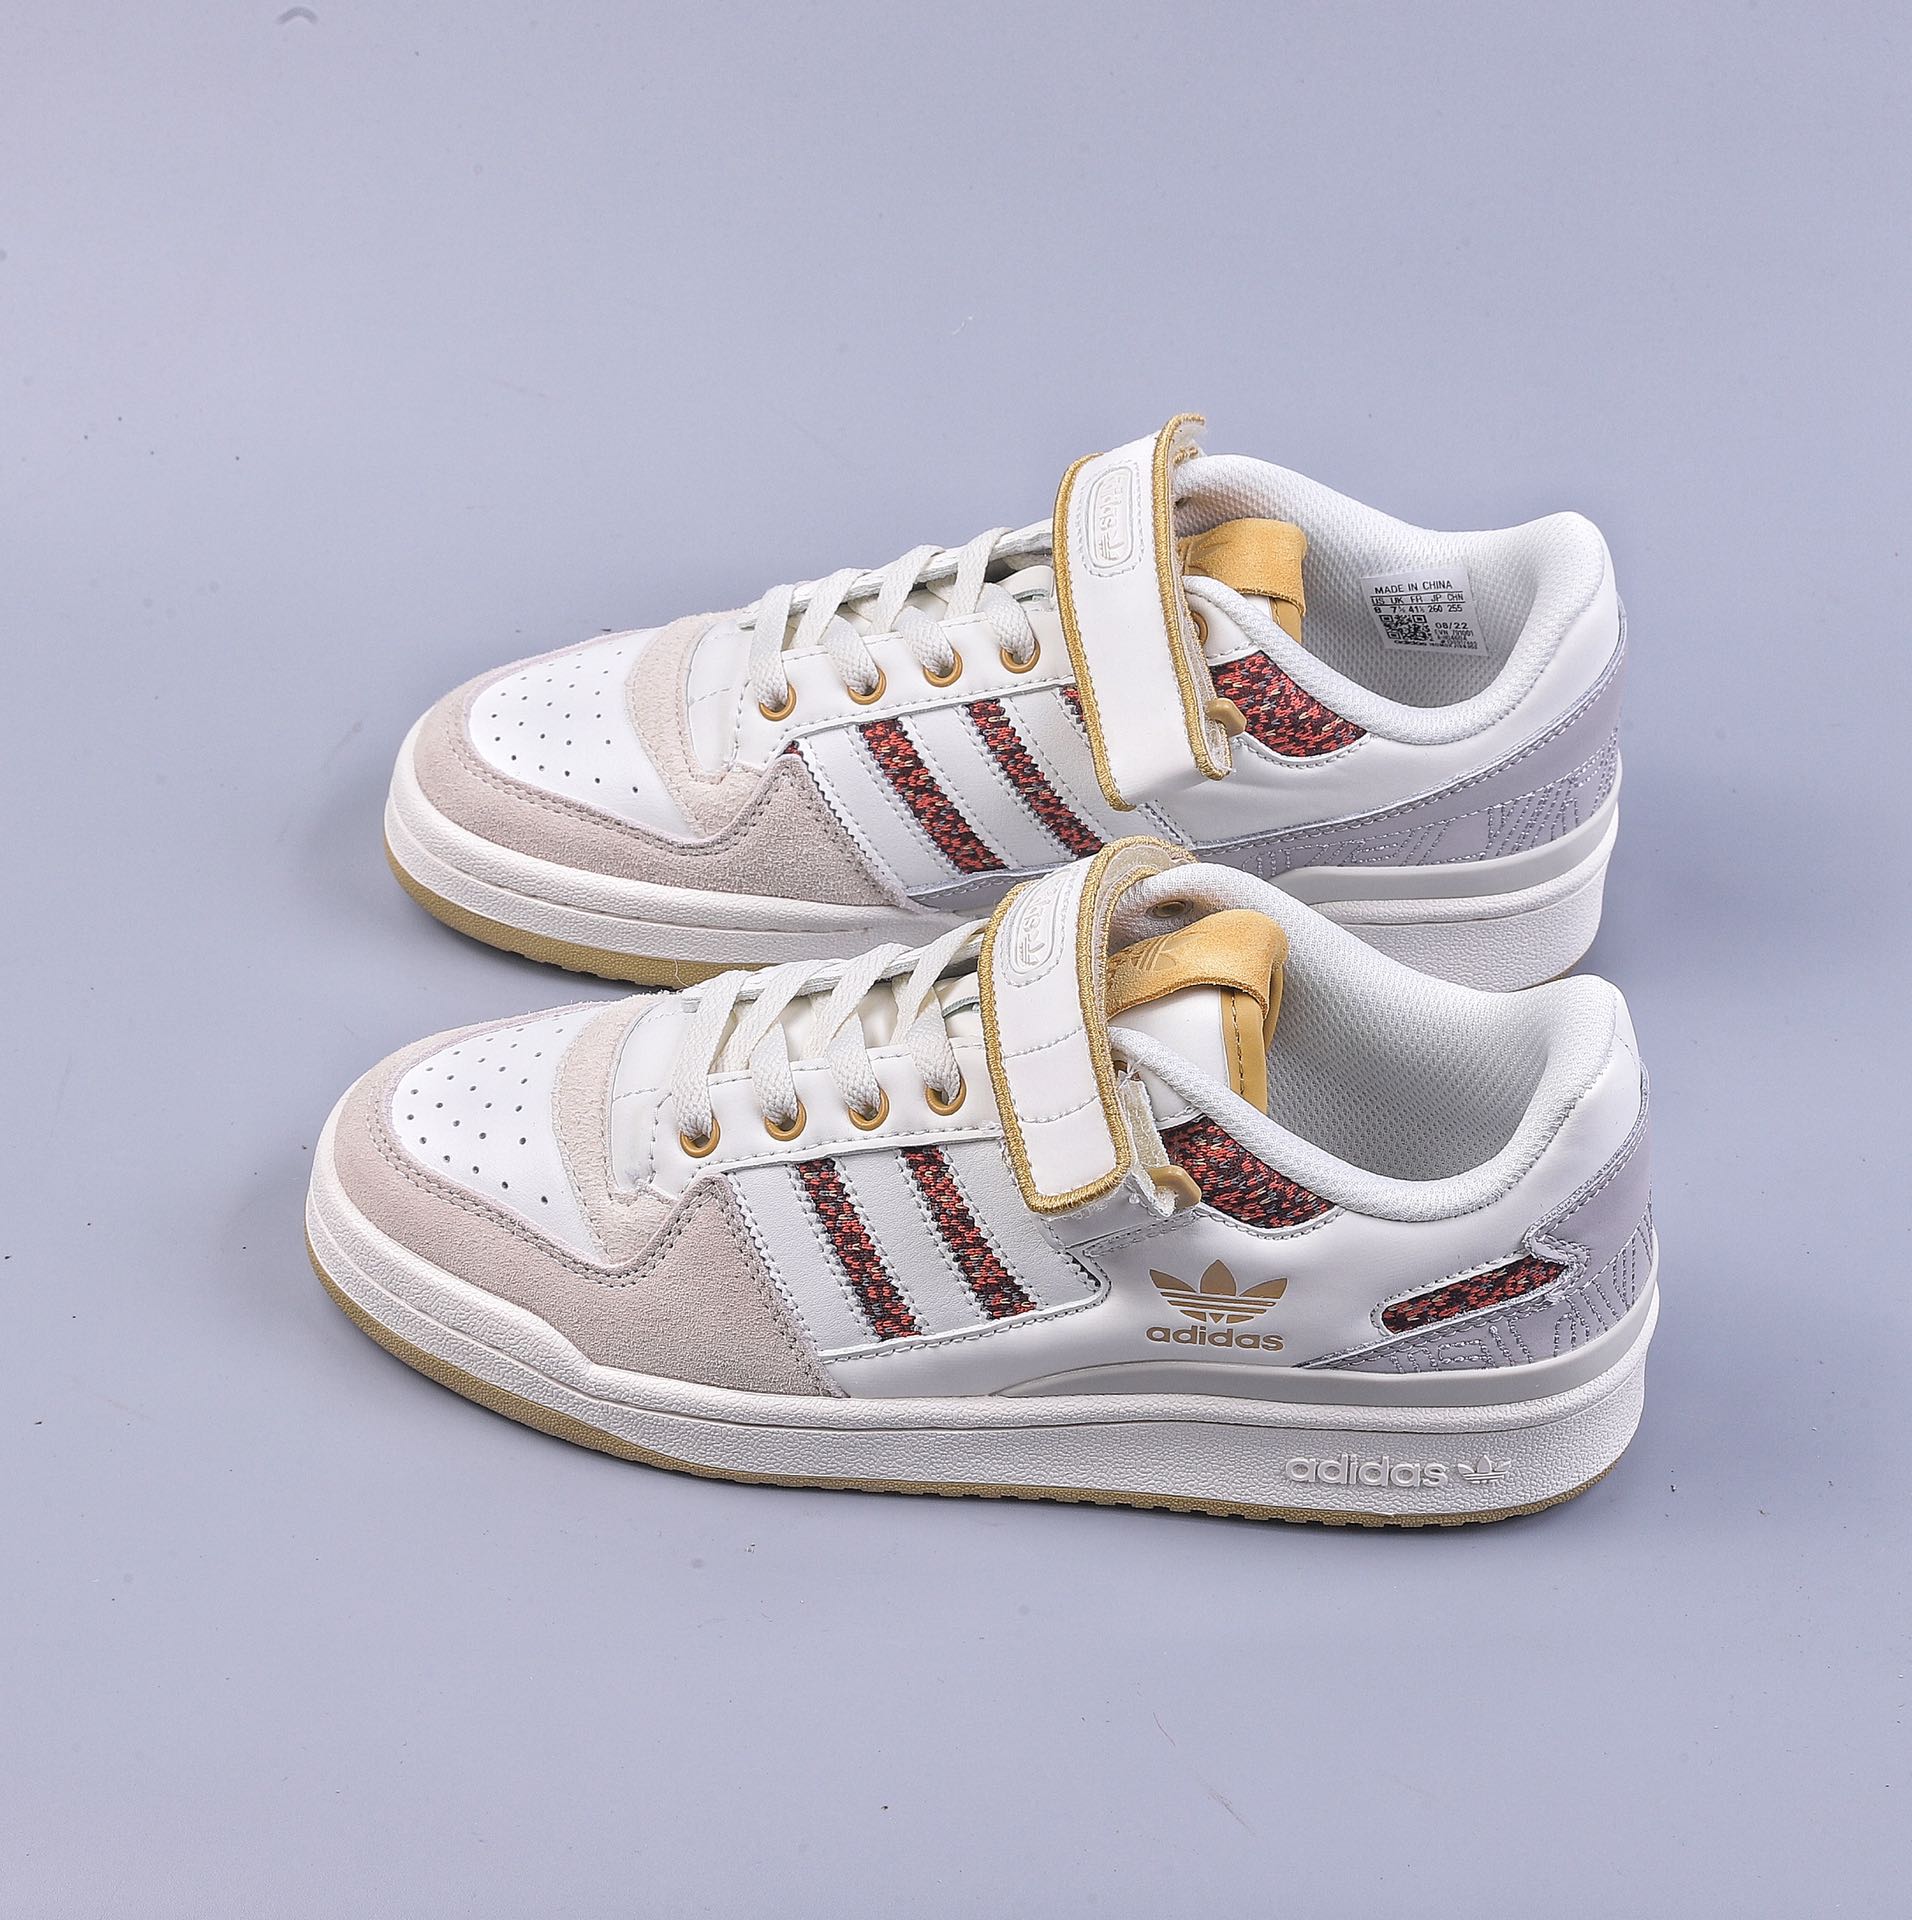 Adidas Forum 84 Low Beige Light Gray Red Low-top All-match Trendy Casual Sports Shoes HQ4604